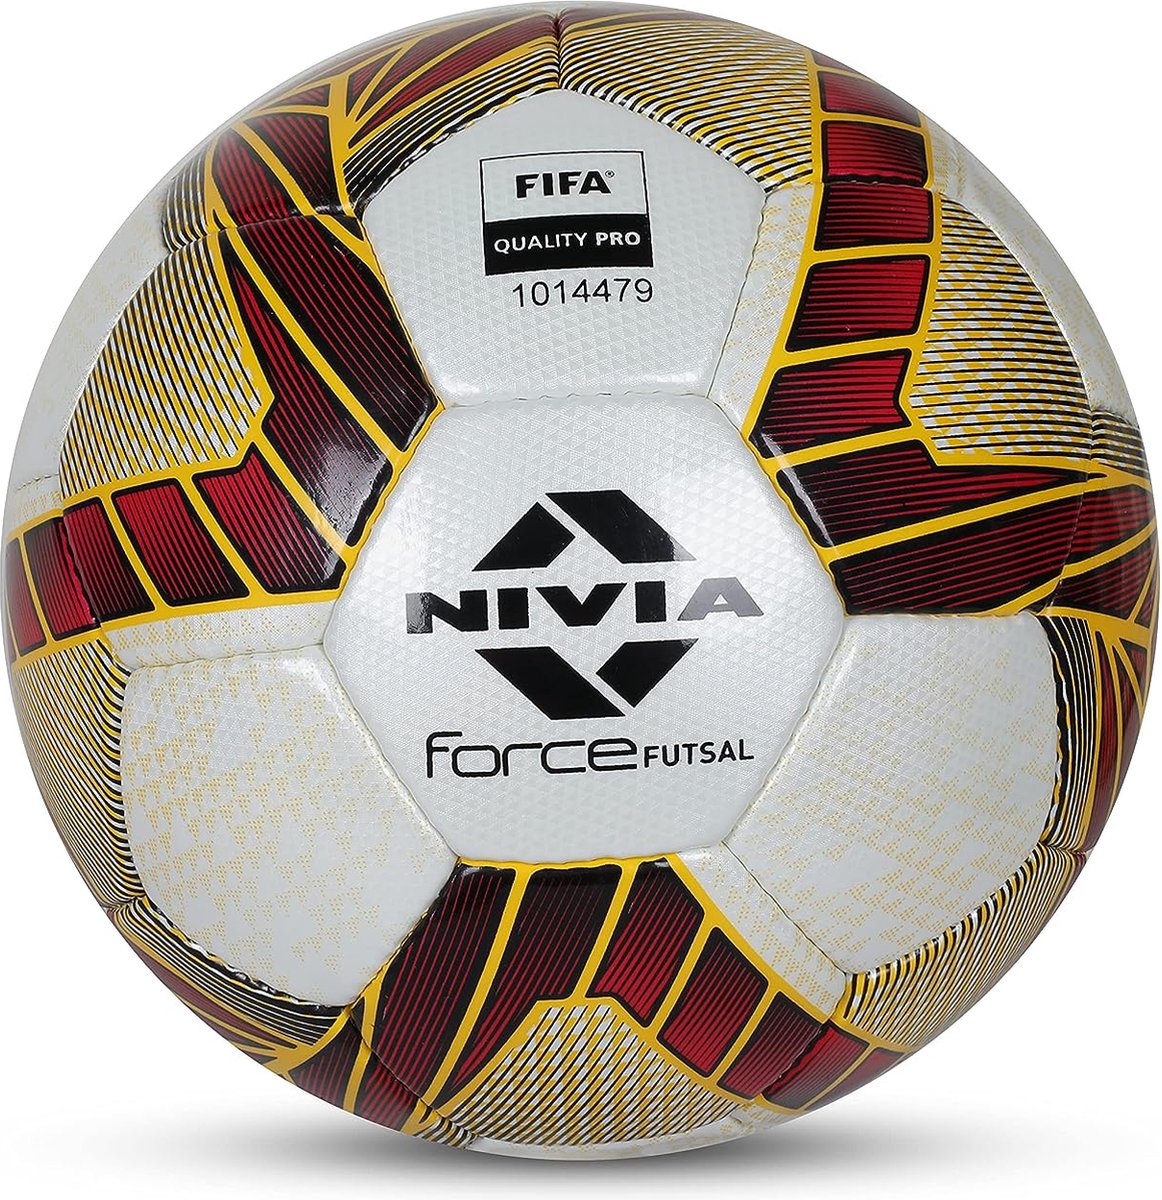 Nivia Force Futsal Football (Multicolor, Size 4) | Material - PU | Youth & Adult | Soccer Ball | All surface | Machine Stitched | Ideal For: Training/Match